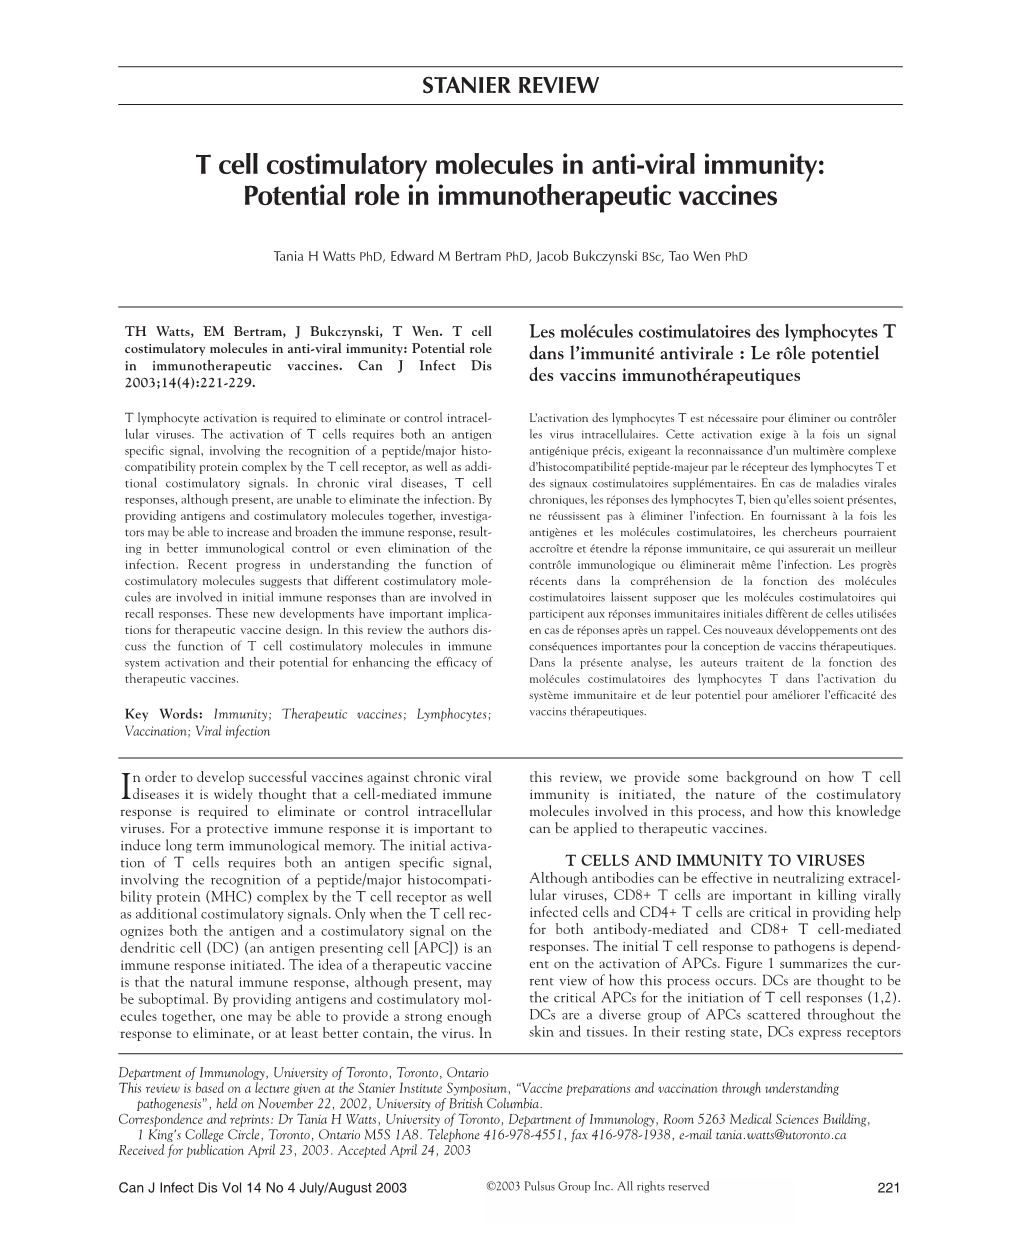 T Cell Costimulatory Molecules in Anti-Viral Immunity: Potential Role in Immunotherapeutic Vaccines